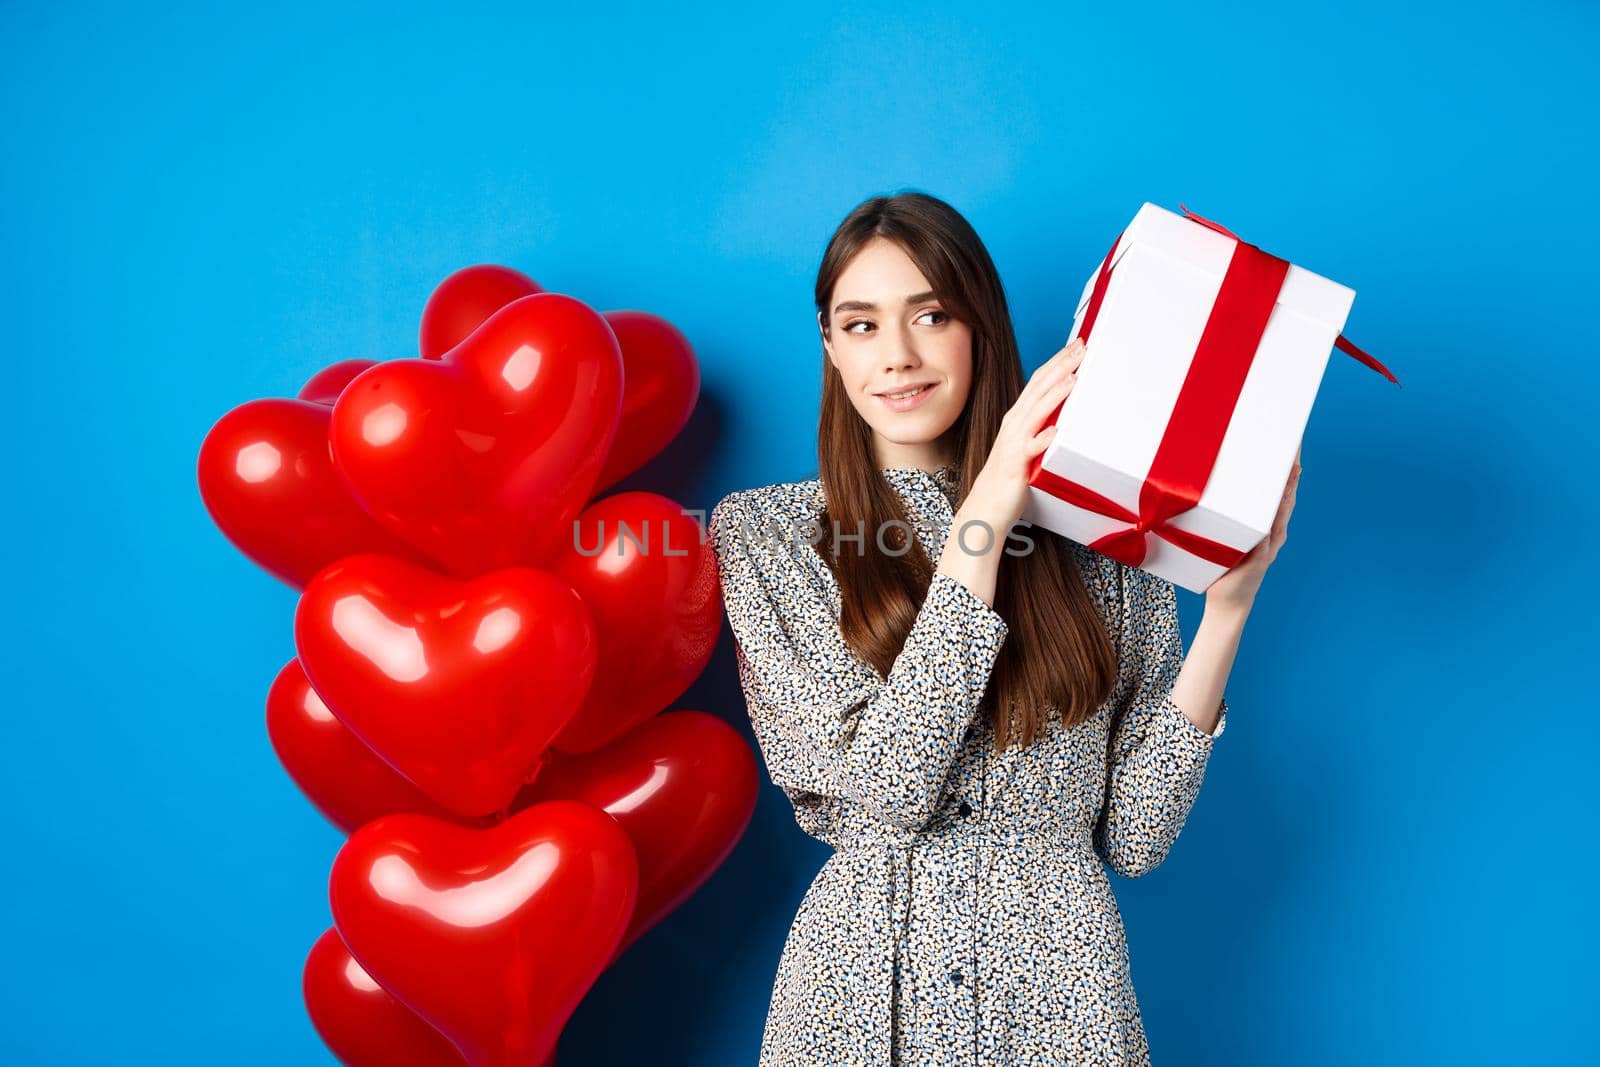 Valentines day. Beautiful woman shaking gift box to guess what inside, celebrating lovers holiday, standing near red hearts, blue background by Benzoix